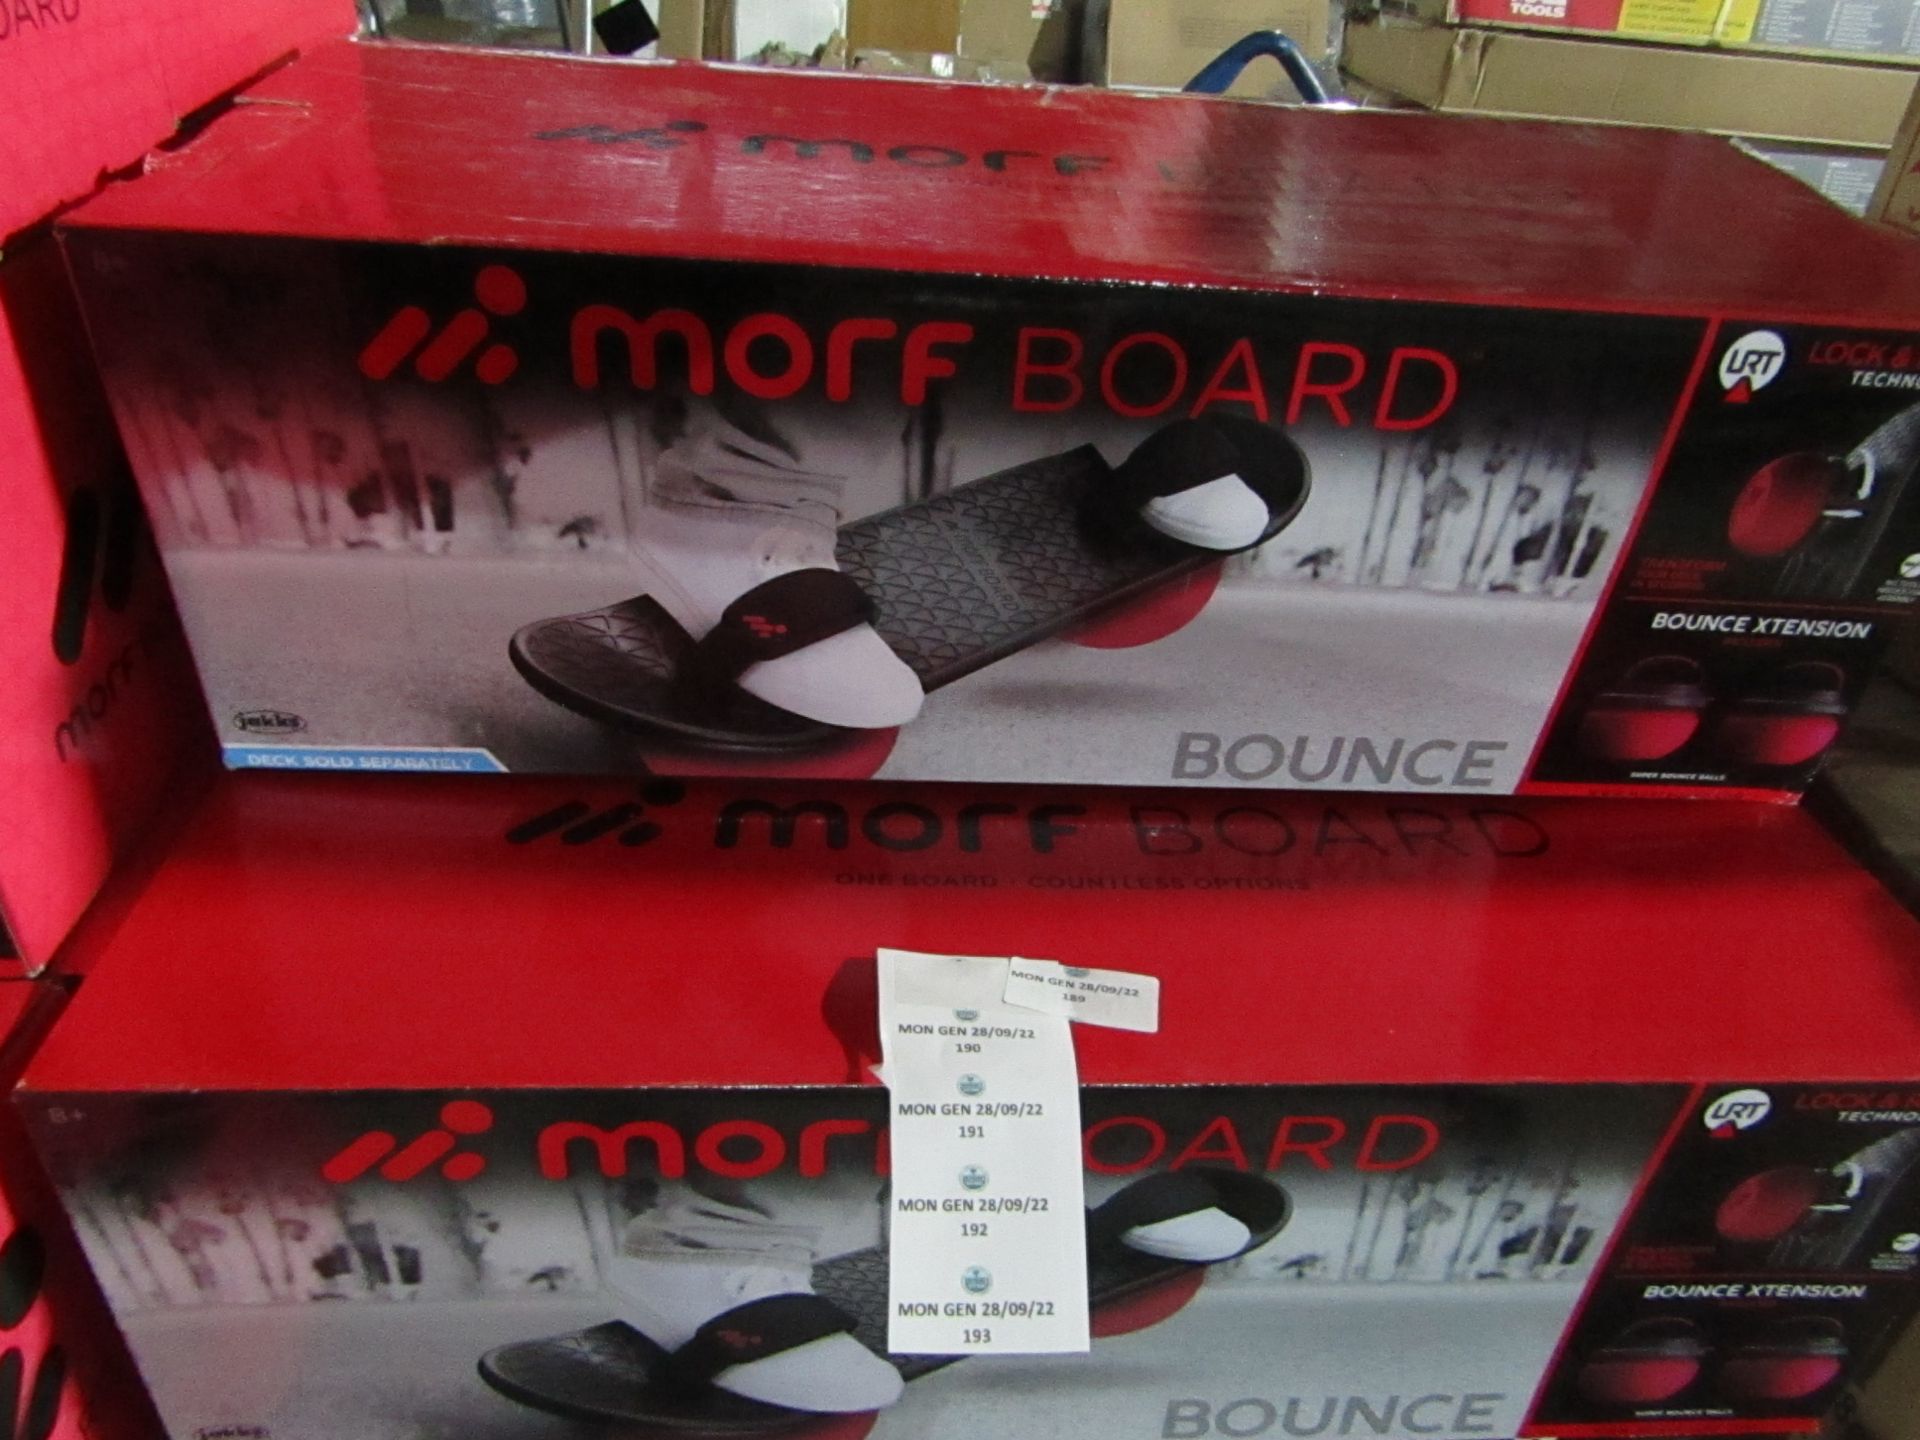 Morf Board - Bounce Xtension Super Bounce Balls - Good Condition & Boxed.